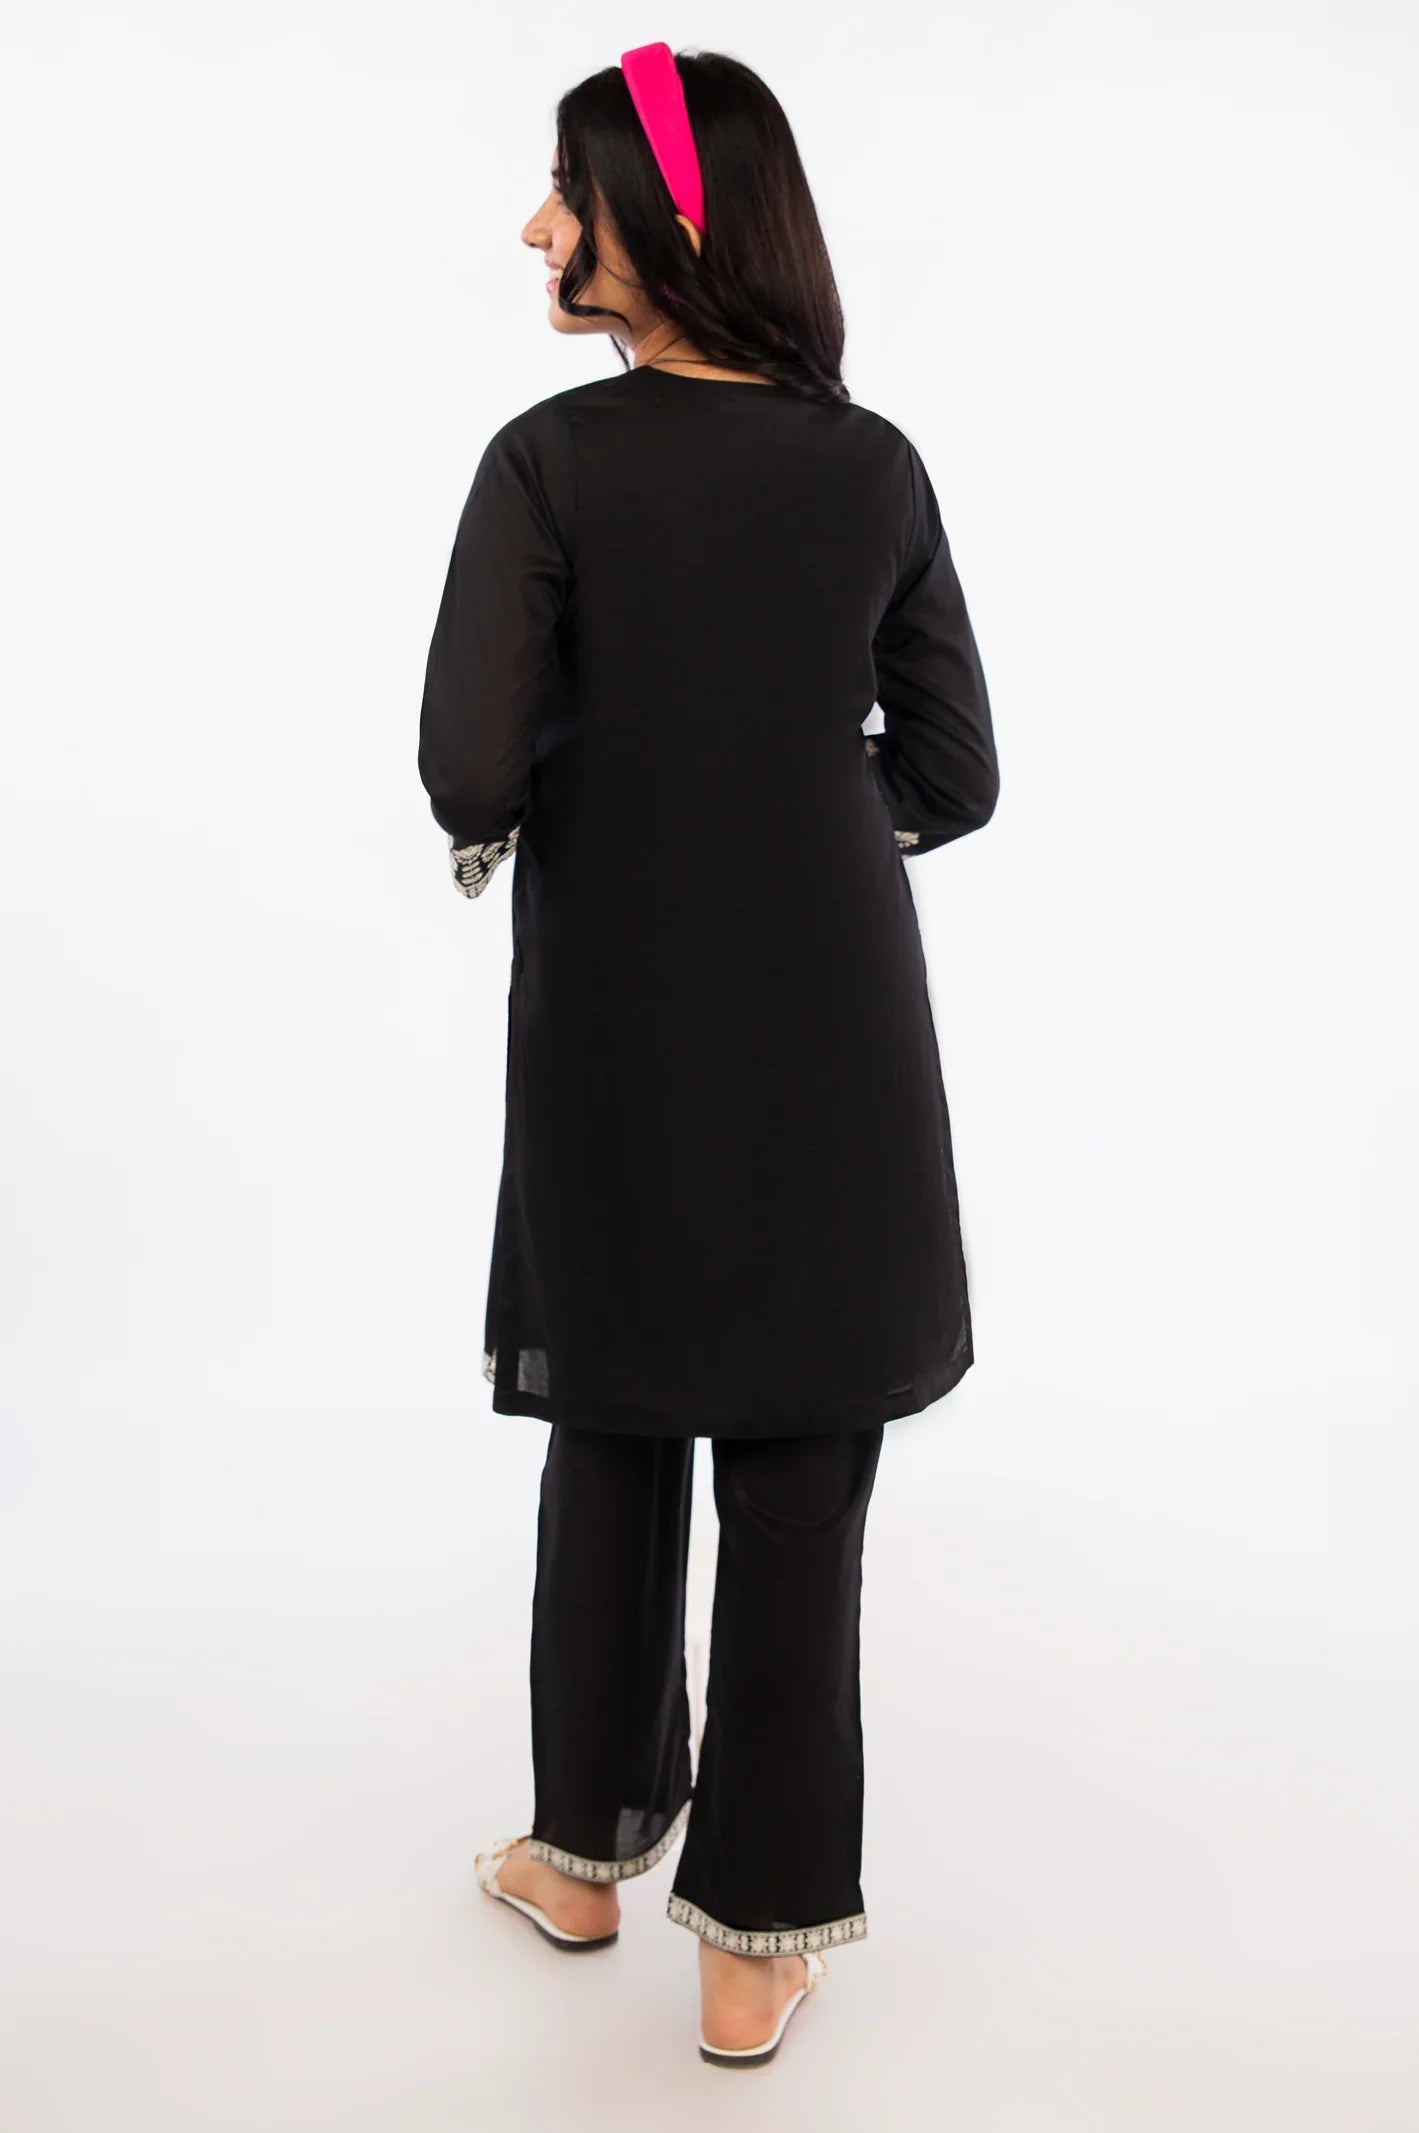 Embroidered Black Teens 2PC Suit - Diners